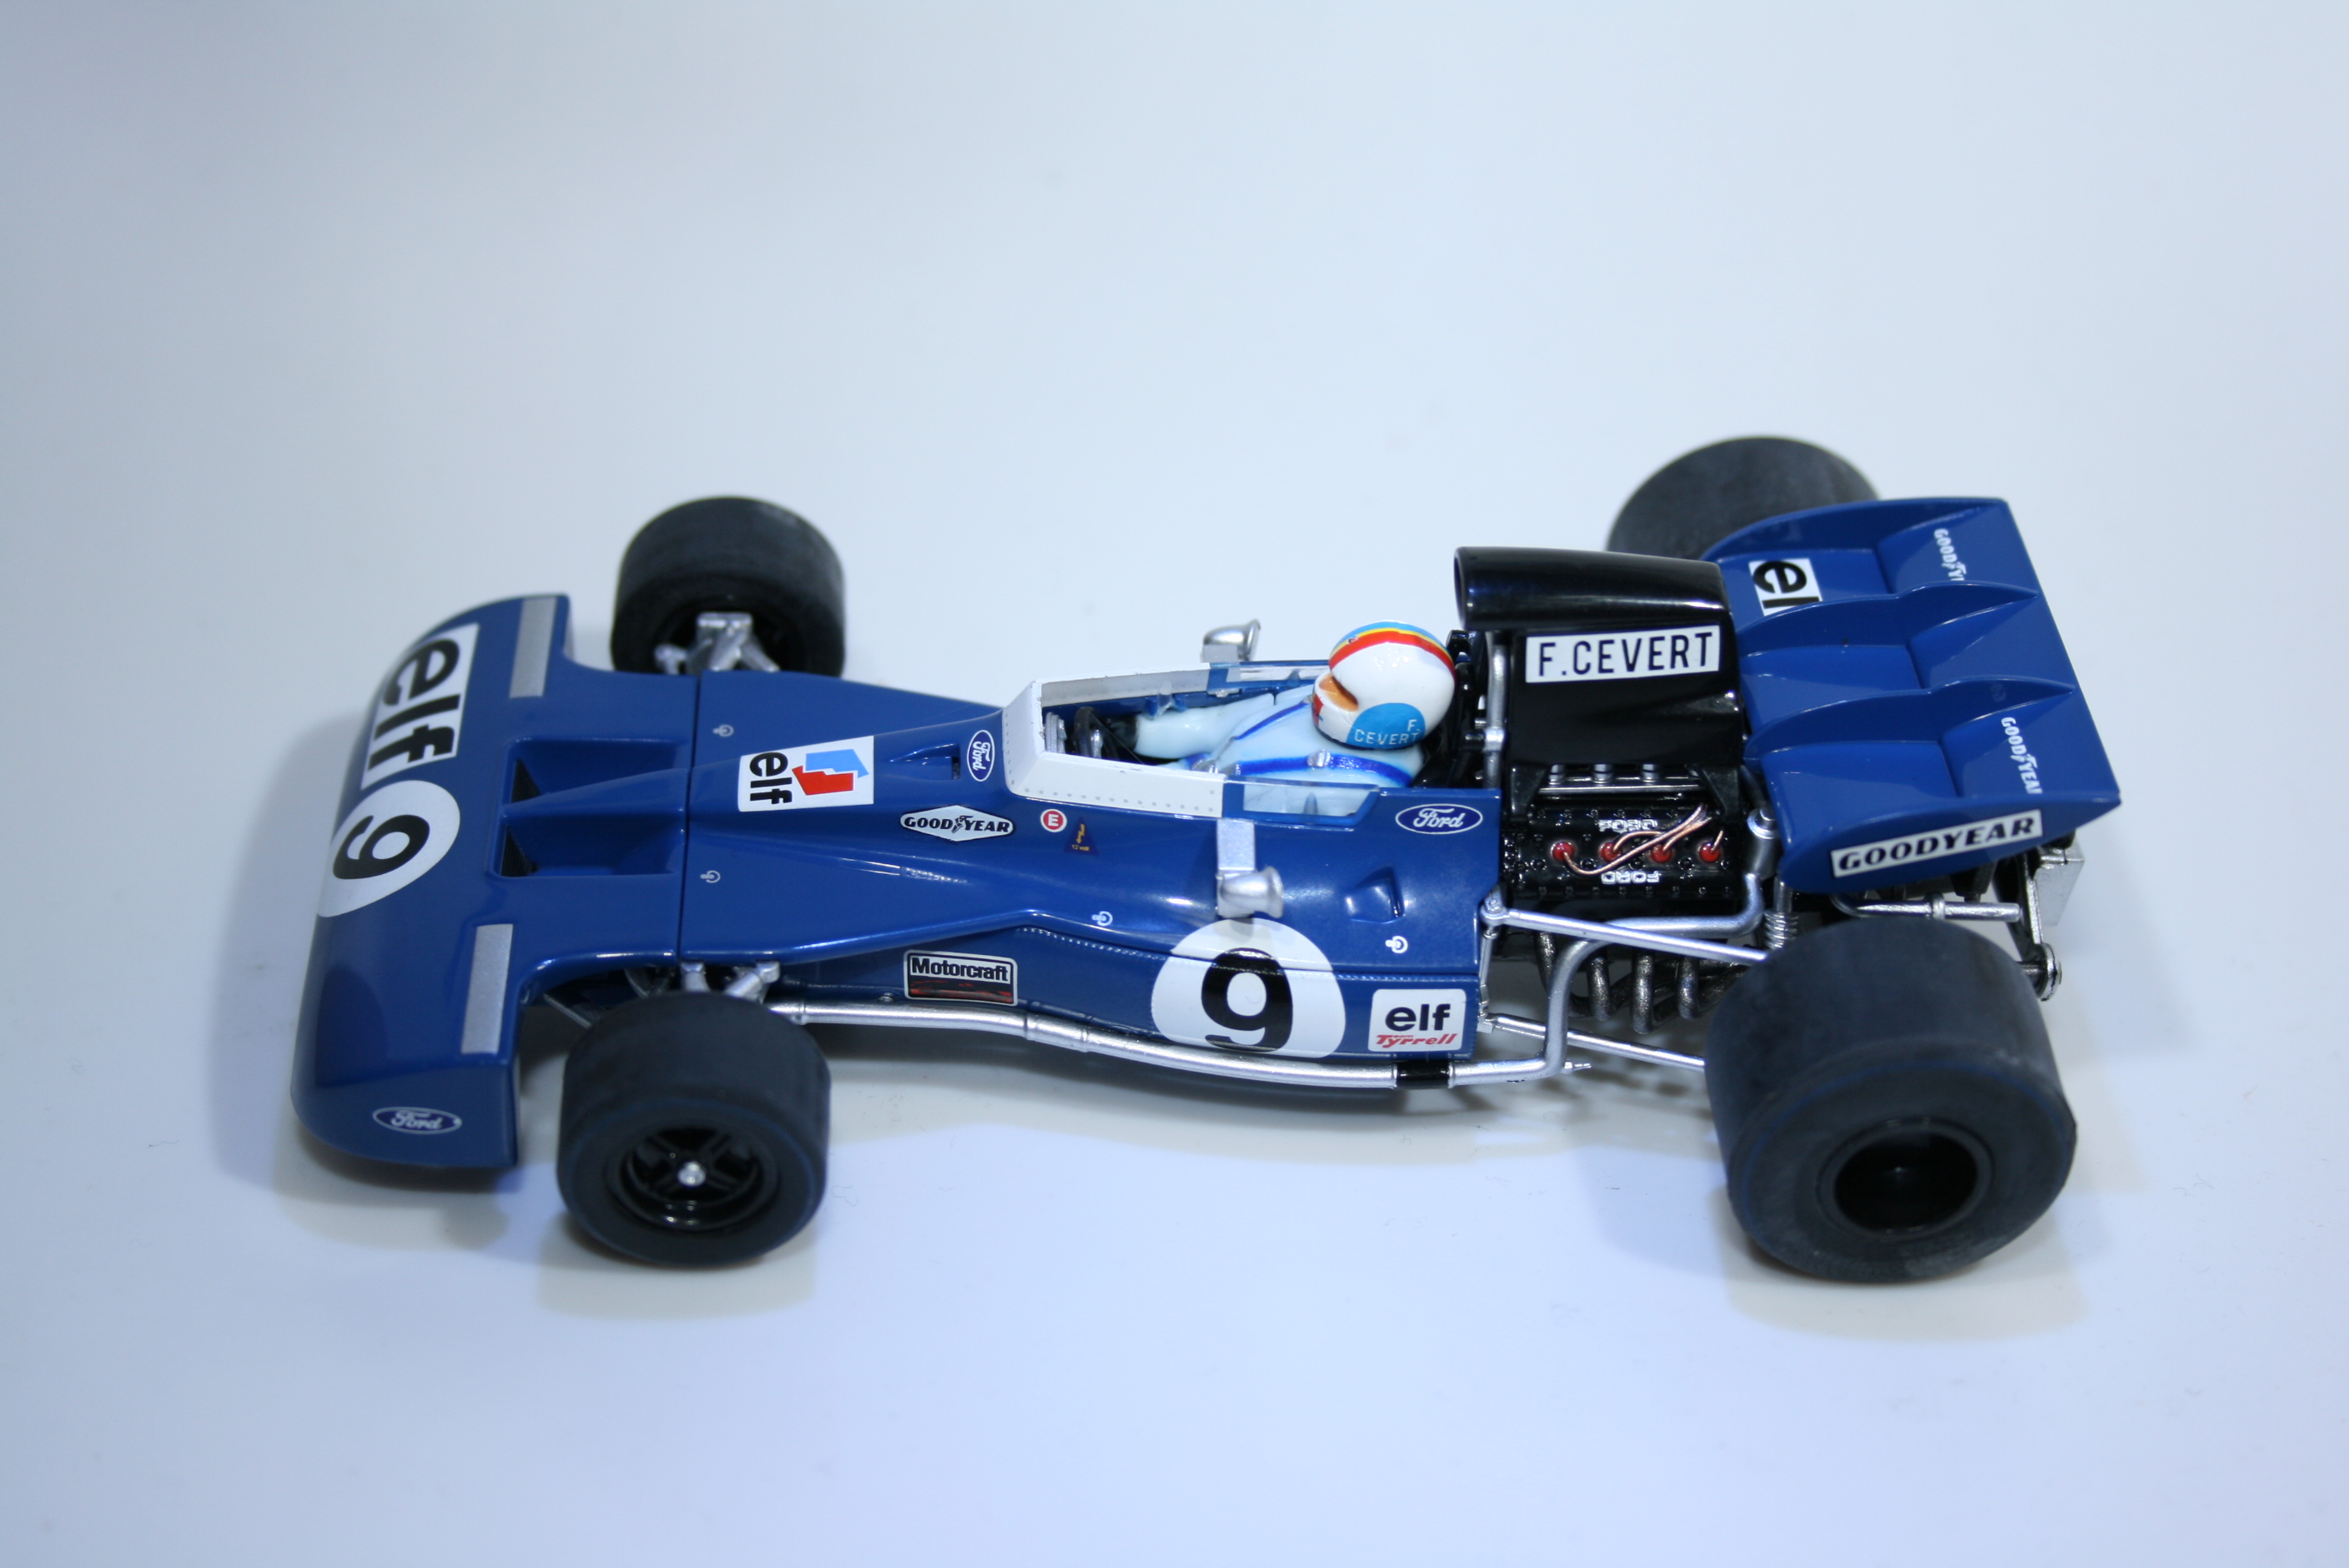 896 Tyrrell 002 1971 F Cevert Scalextric C3759A 2015 Boxed